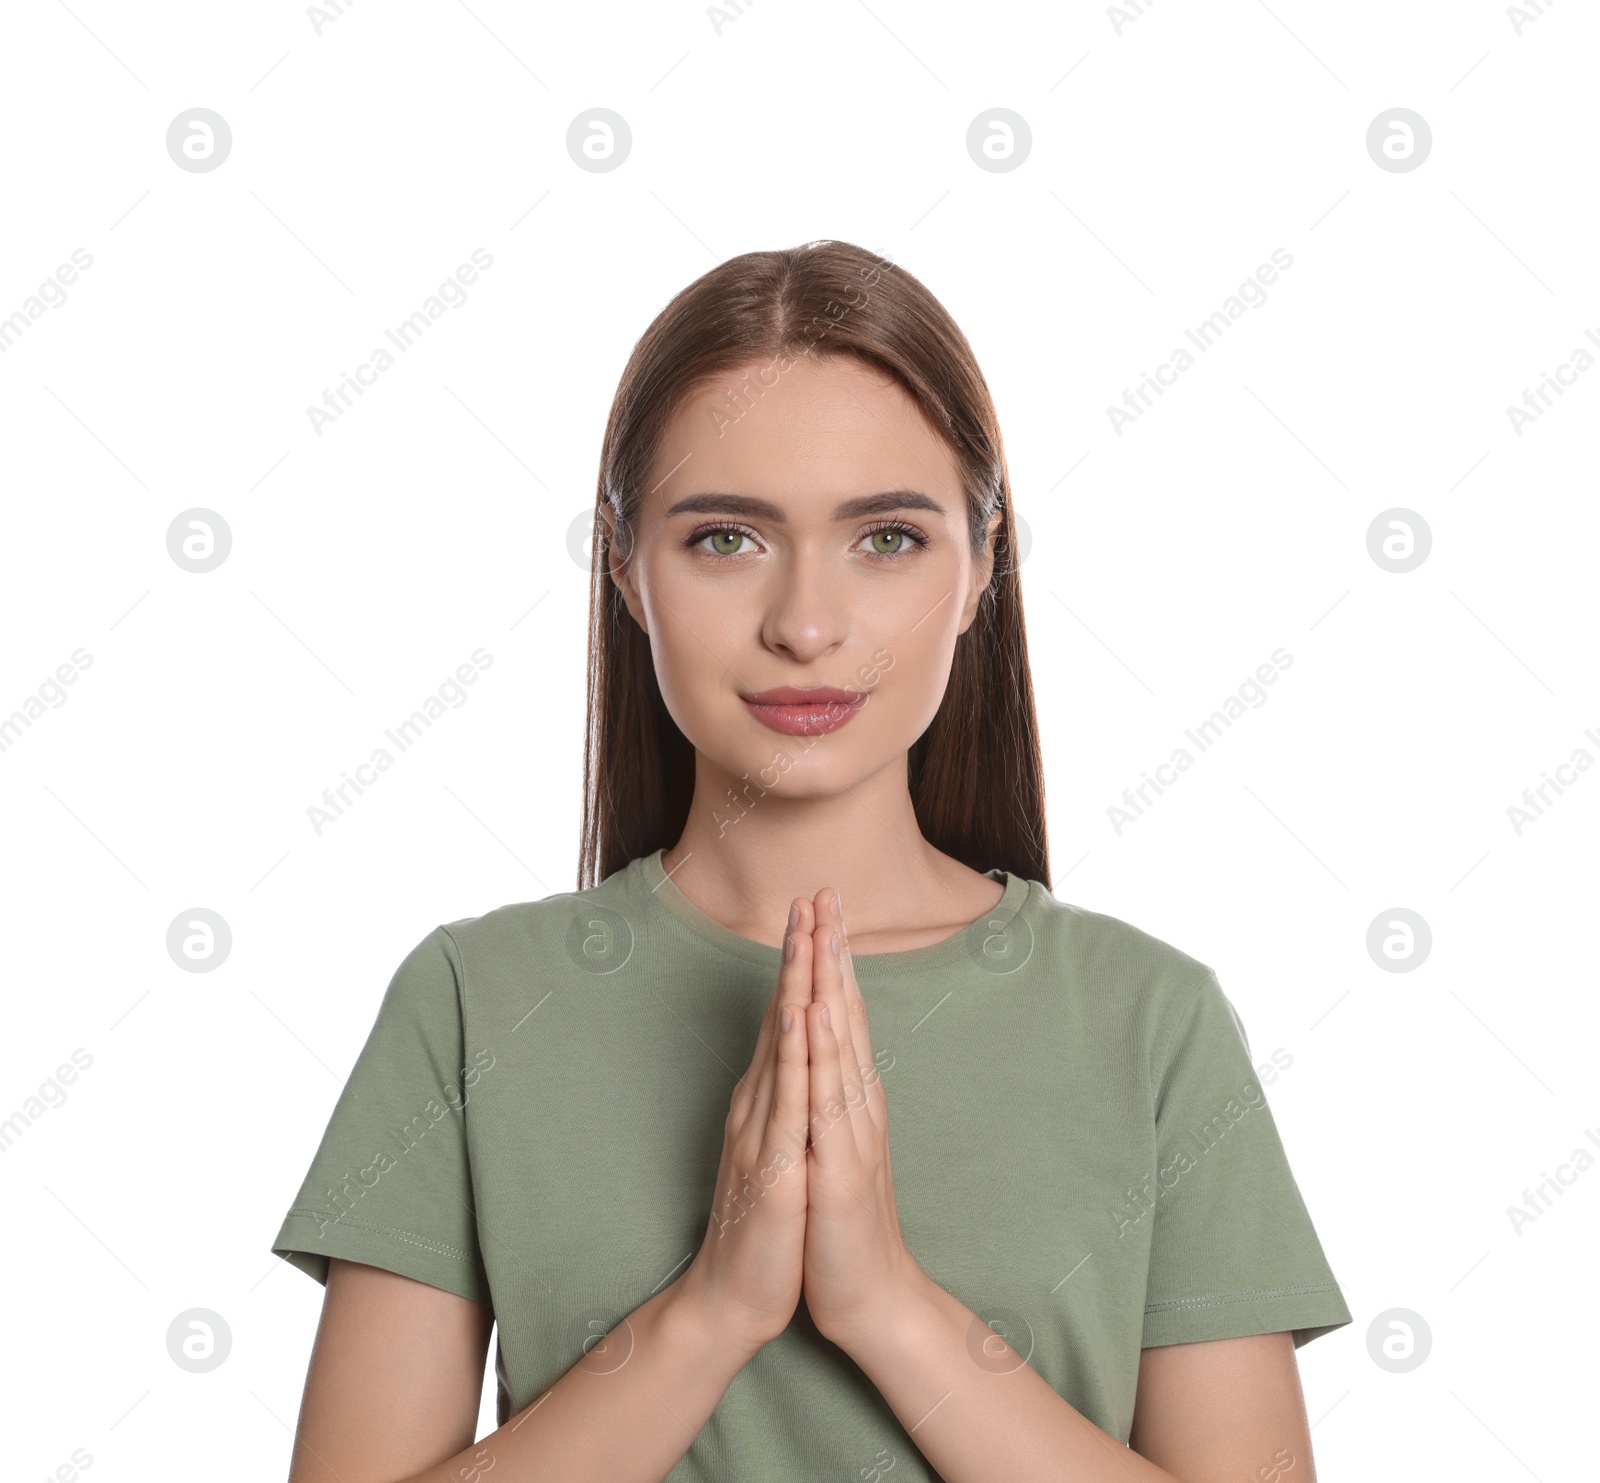 Photo of Woman with clasped hands praying on white background